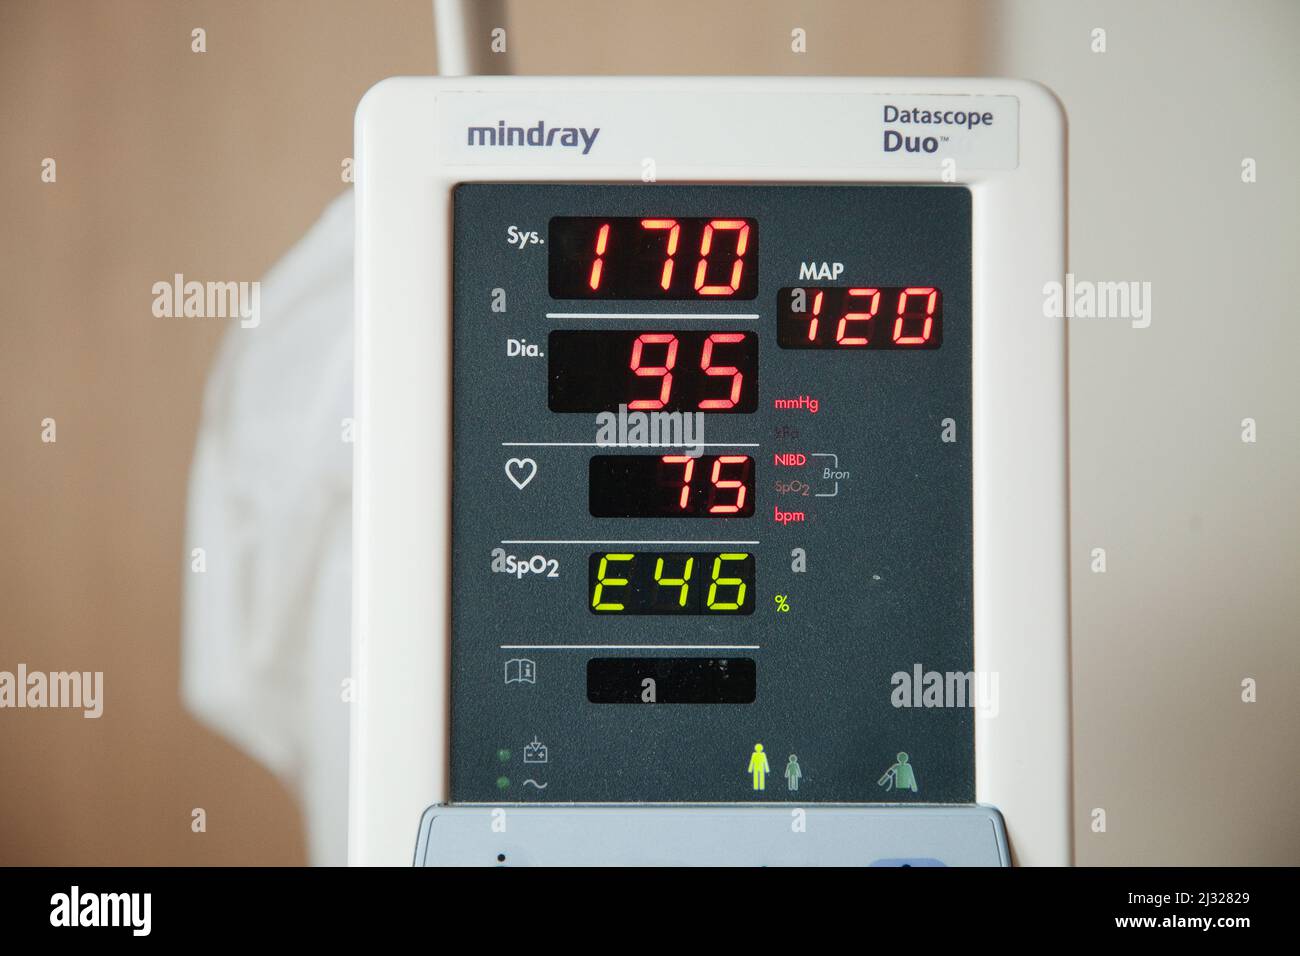 Netherlands, a patient monitor in hospital to show ao heart rate, blood and oxygen. Stock Photo